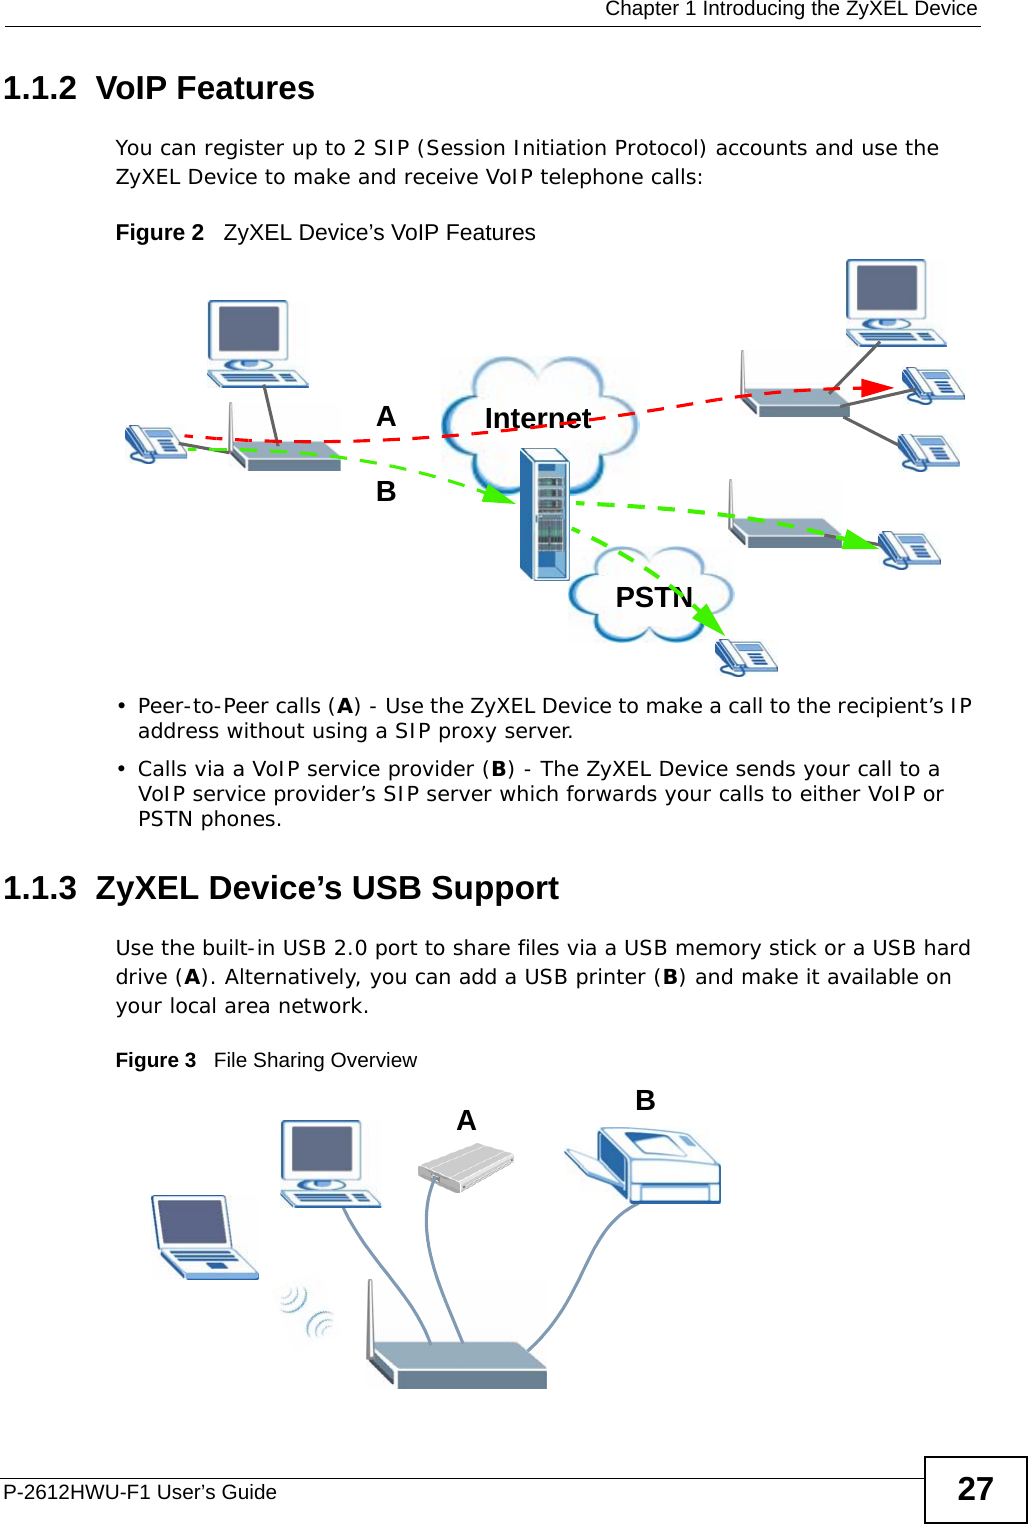  Chapter 1 Introducing the ZyXEL DeviceP-2612HWU-F1 User’s Guide 271.1.2  VoIP FeaturesYou can register up to 2 SIP (Session Initiation Protocol) accounts and use the ZyXEL Device to make and receive VoIP telephone calls:Figure 2   ZyXEL Device’s VoIP Features• Peer-to-Peer calls (A) - Use the ZyXEL Device to make a call to the recipient’s IP address without using a SIP proxy server. • Calls via a VoIP service provider (B) - The ZyXEL Device sends your call to a VoIP service provider’s SIP server which forwards your calls to either VoIP or PSTN phones.1.1.3  ZyXEL Device’s USB SupportUse the built-in USB 2.0 port to share files via a USB memory stick or a USB hard drive (A). Alternatively, you can add a USB printer (B) and make it available on your local area network.Figure 3   File Sharing OverviewInternetPSTNABAB